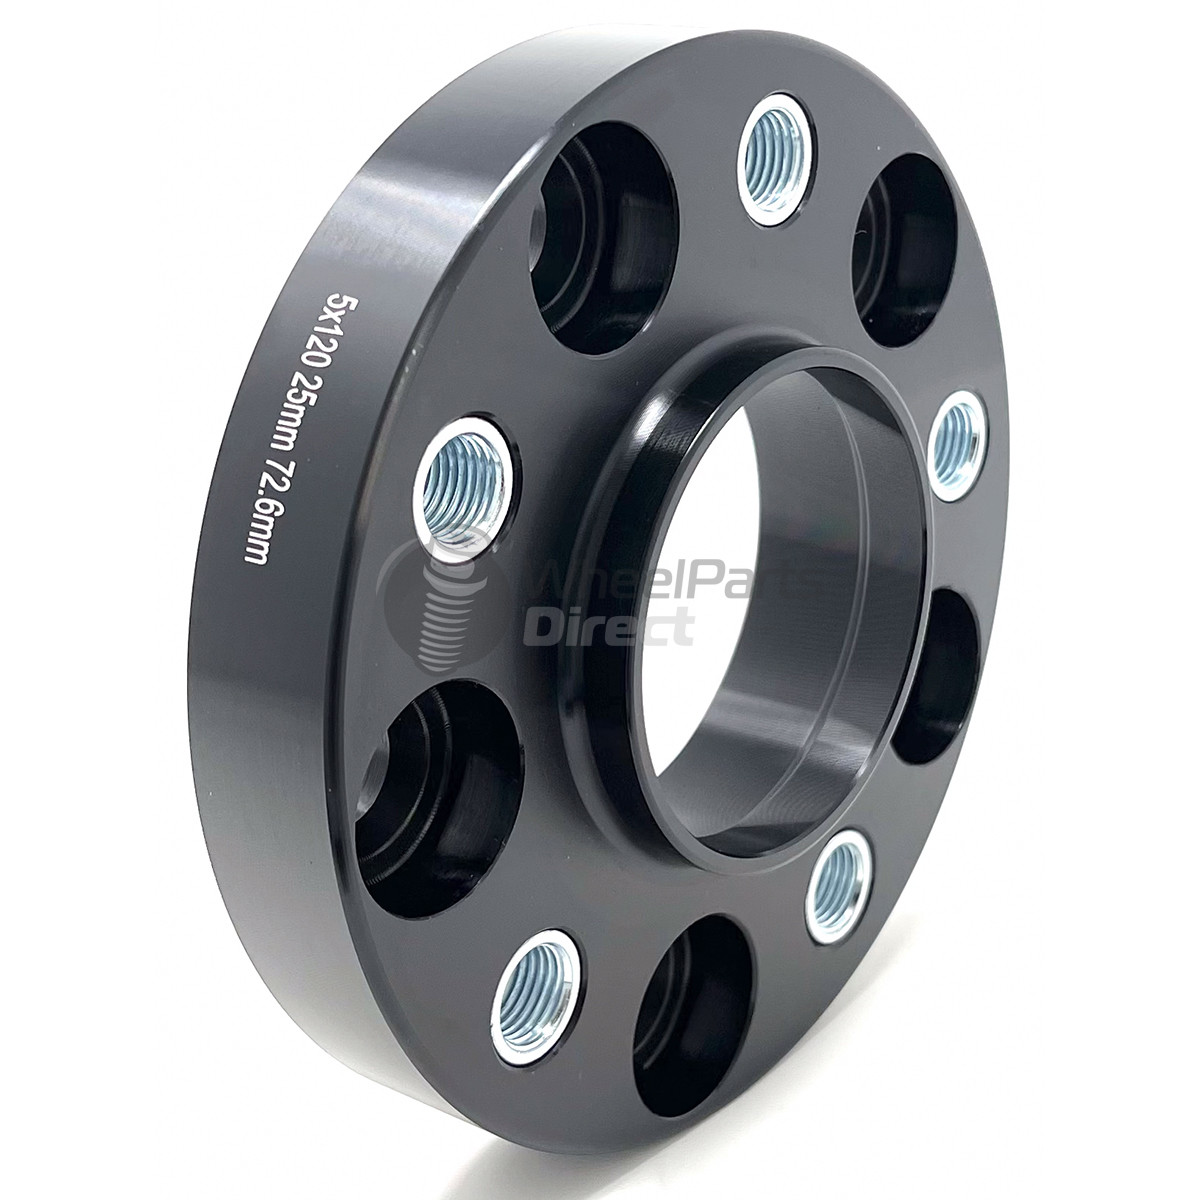 5x120 72.6 25mm GEN2 Bolt-On-Bolts Wheel Spacers